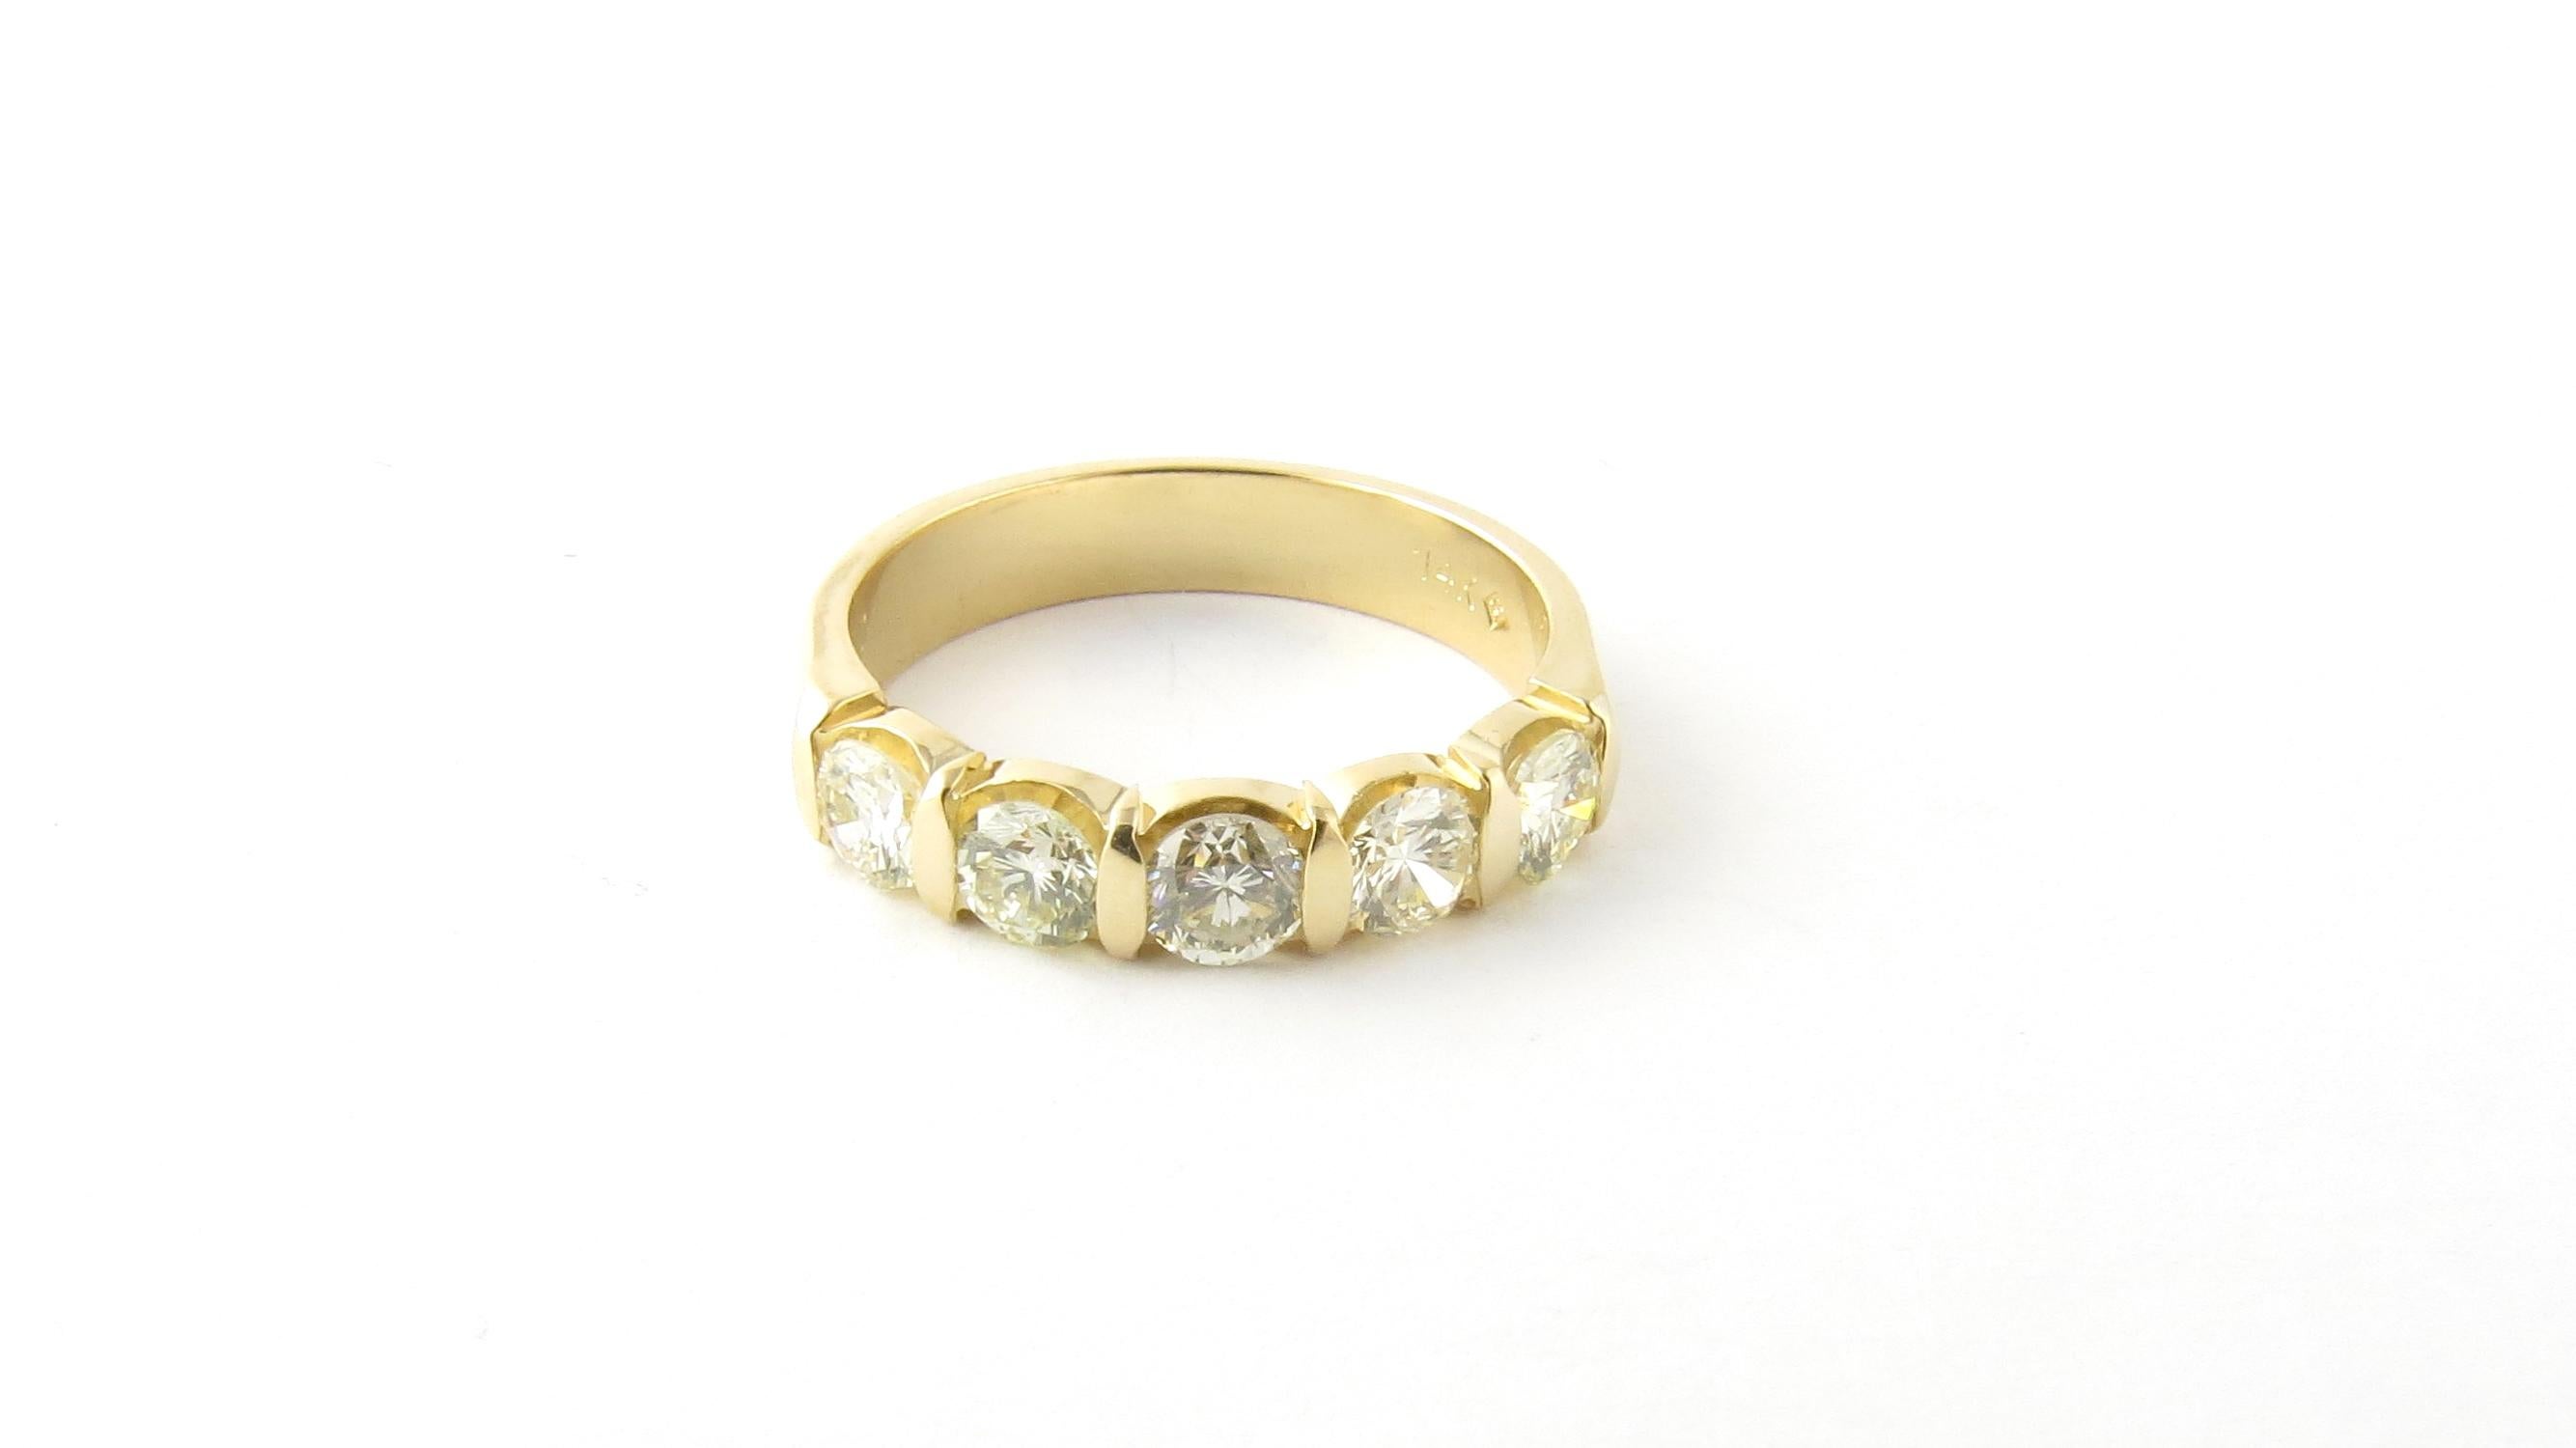 Vintage 14 Karat Yellow Gold Diamond Wedding Band Size 6

This sparkling wedding band features five round brilliant cut diamonds set in classic 14K yellow gold. Shank measures 3.5 mm.

Approximate total diamond weight: .90 ct.

Diamond color: